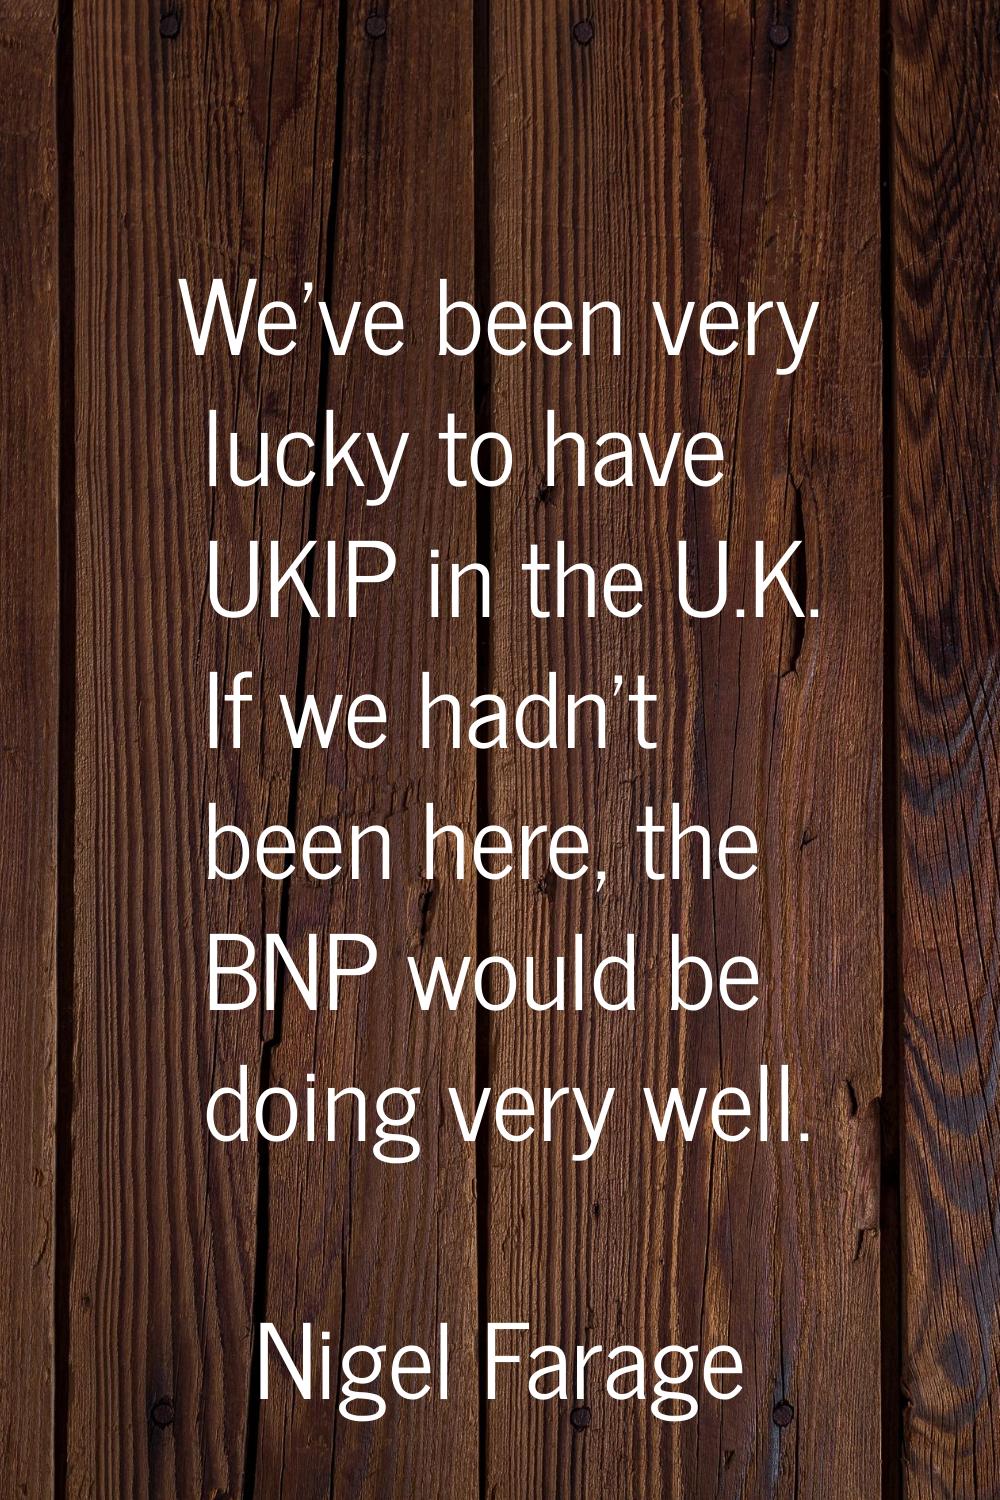 We've been very lucky to have UKIP in the U.K. If we hadn't been here, the BNP would be doing very 